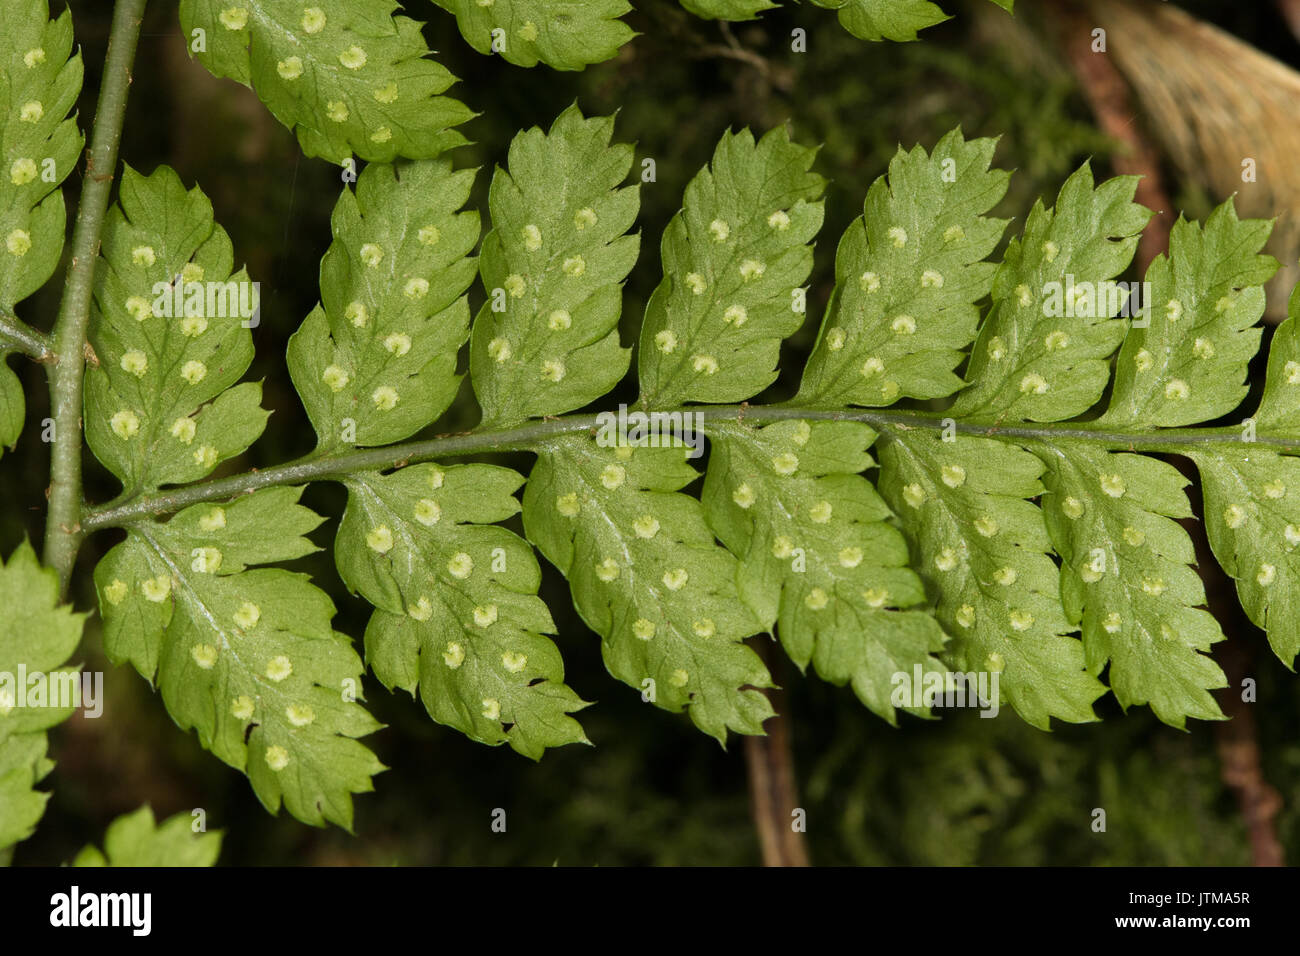 Sporangia on the underside of a Broad Buckler Fern (Dryopteris dilatata) frond Stock Photo